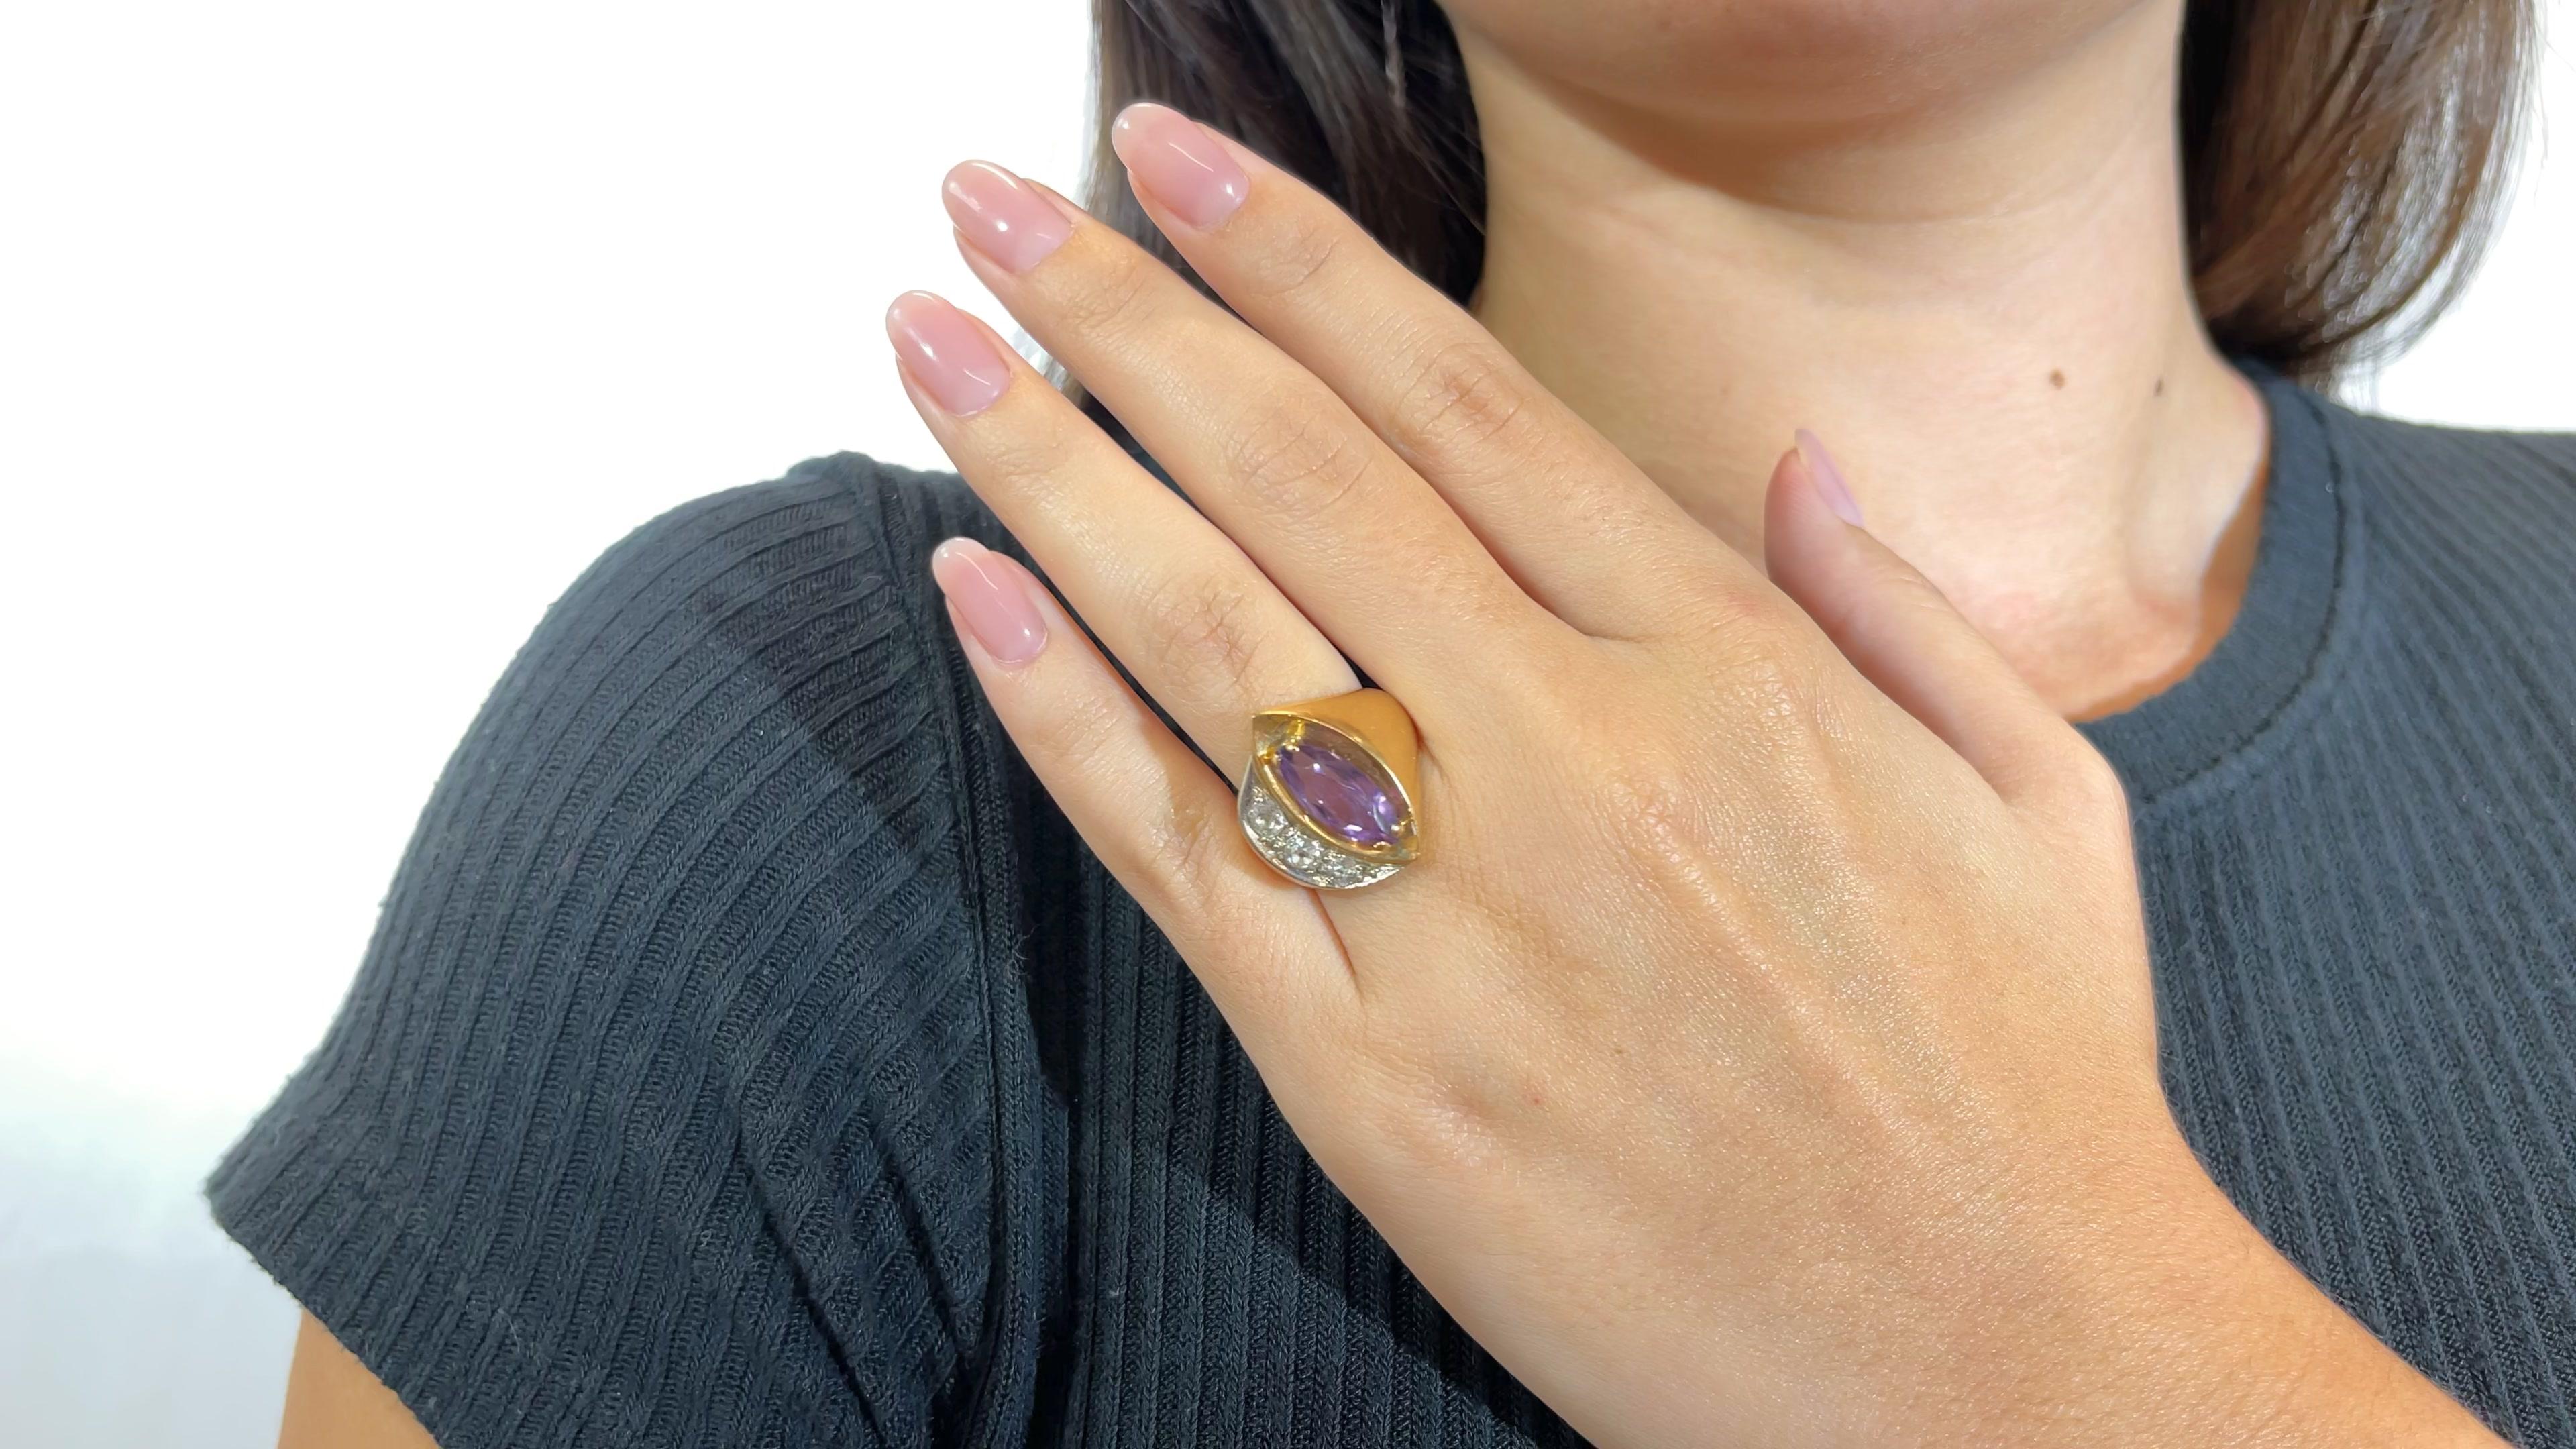 Retro French Amethyst Diamond Gold Ring. Featuring an amethyst approximately 1.68 carat. Accented by 3 Old Mine Cut diamonds approximately 0.62 carat total, G-H color, VS clarity. In 18k gold and platinum with French hallmark and maker's mark. Circa